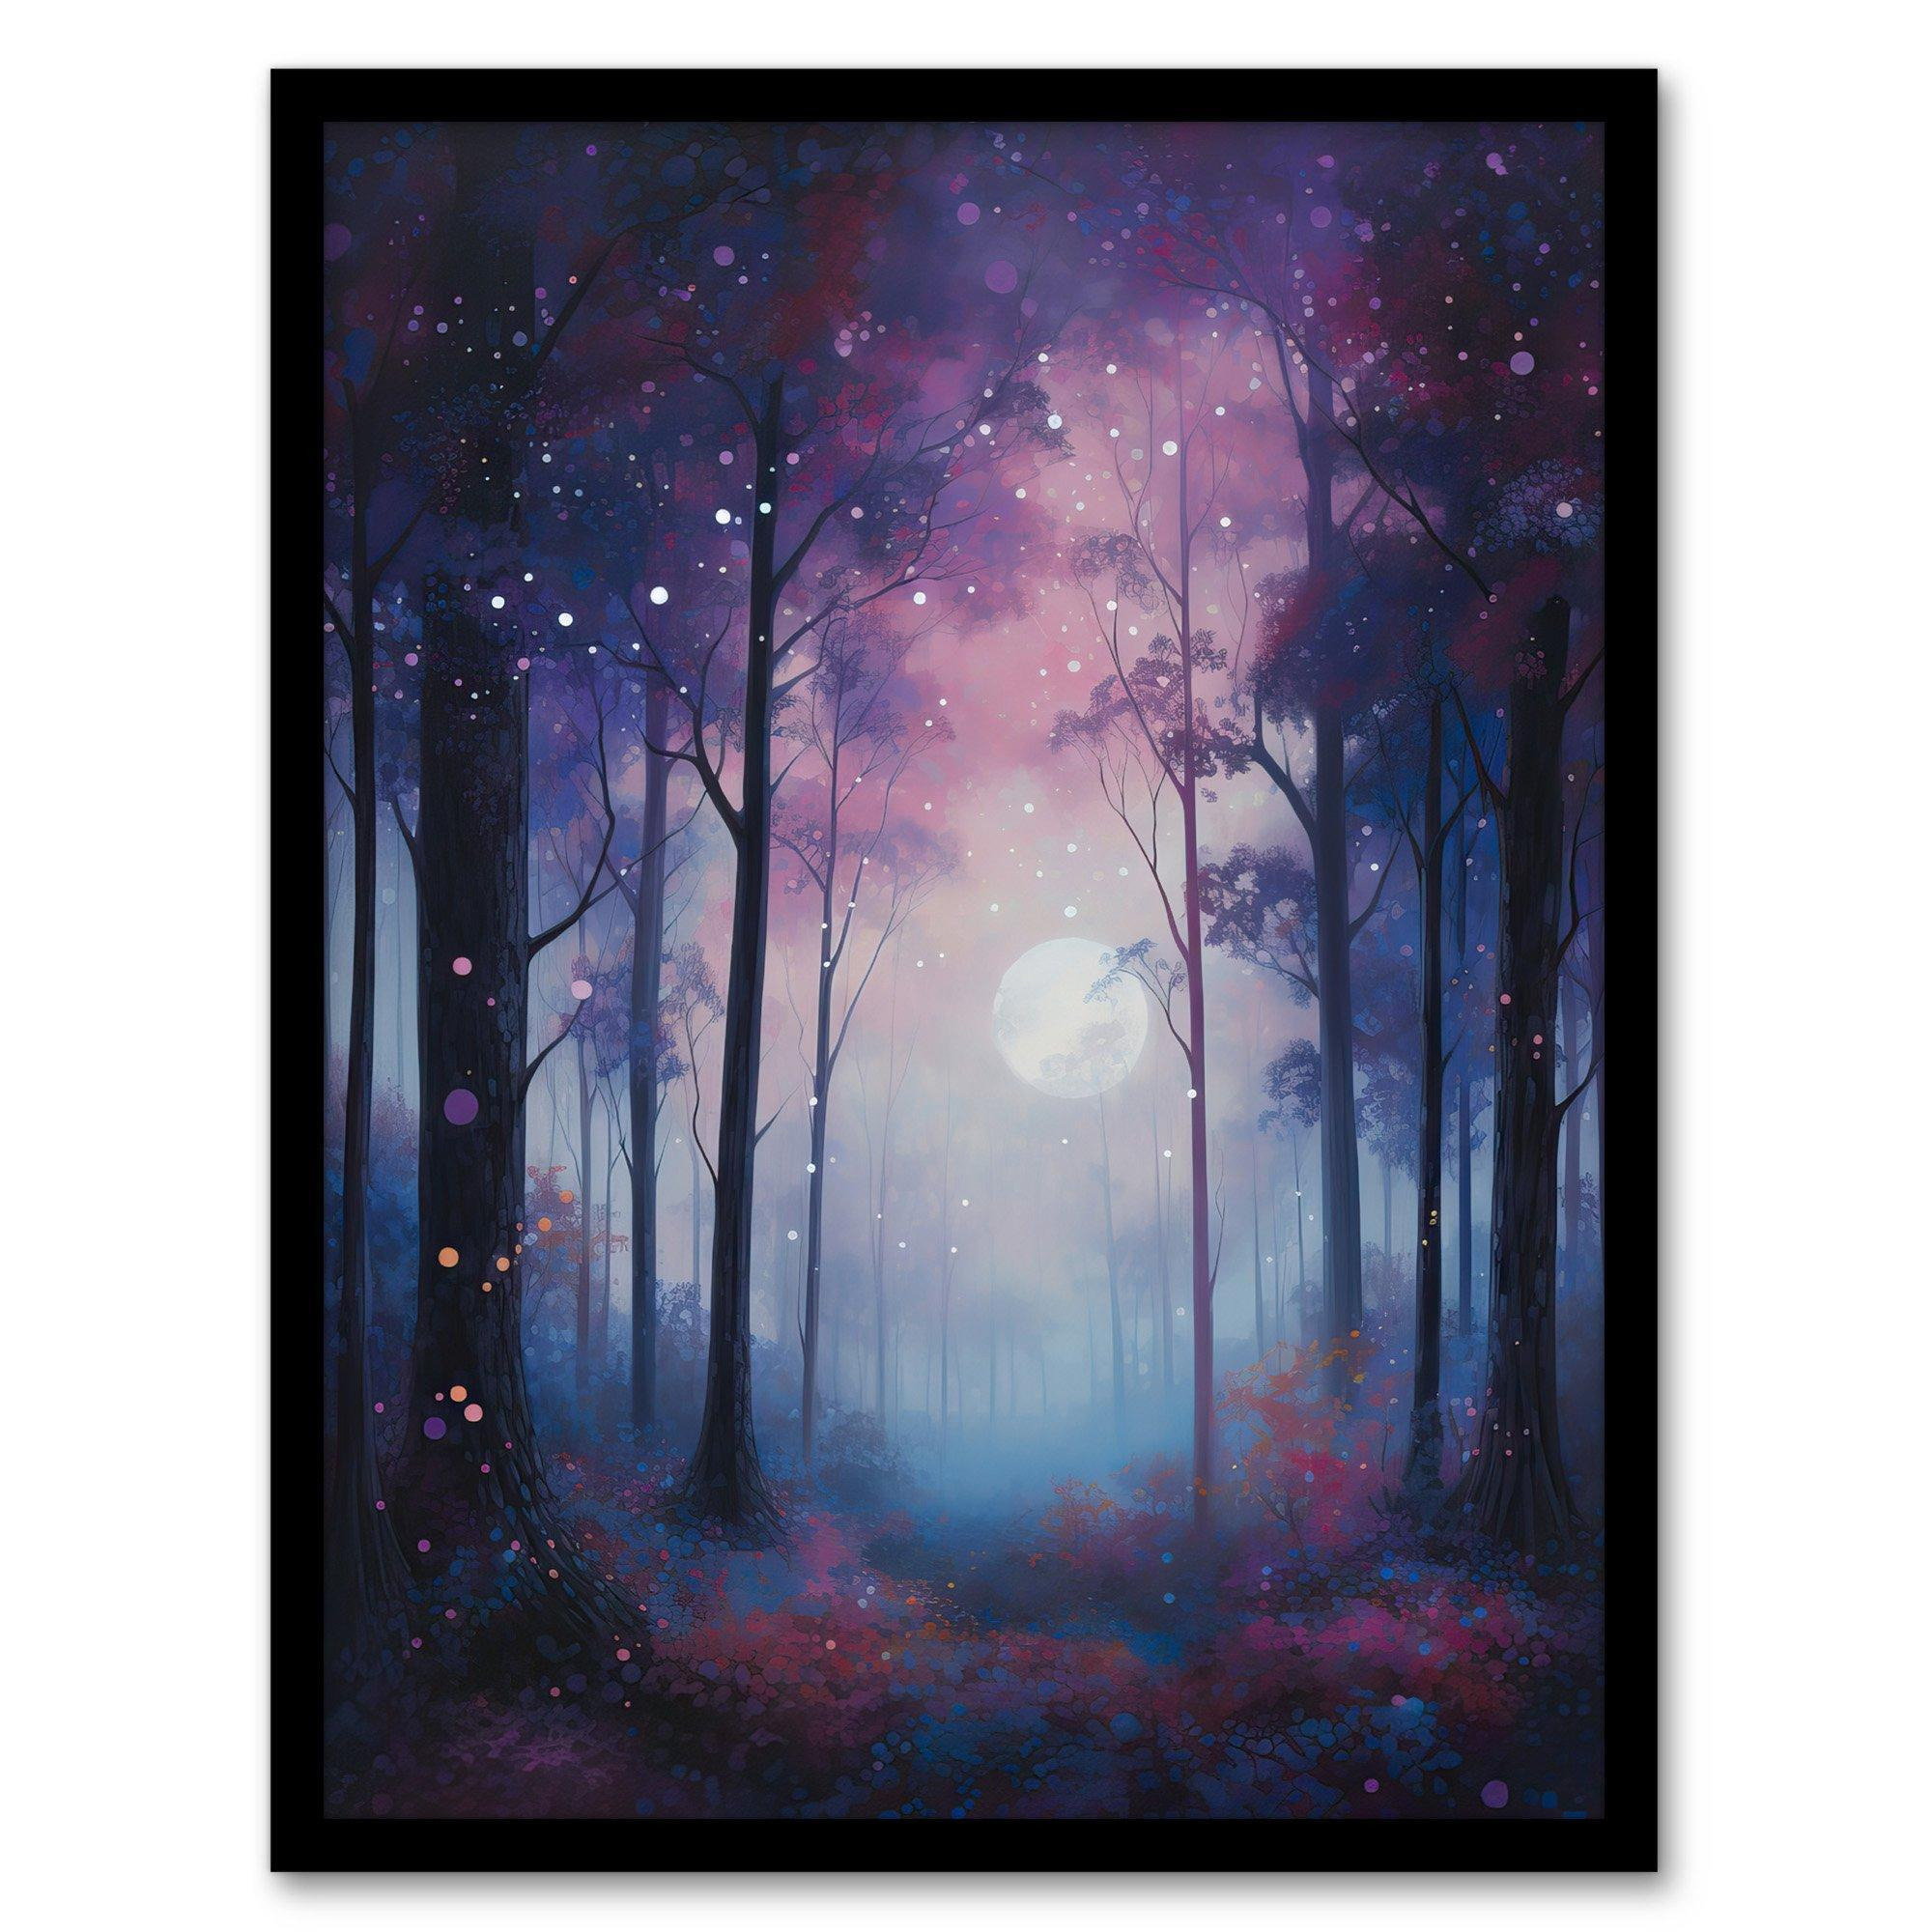 Enchanted Forest In Soft Moonlight Oil Painting Full Moon Fantasy Landscape With Fireflies Colourful Magical Nature Mystical Modern Art Print Framed Poster Wall Decor - image 1